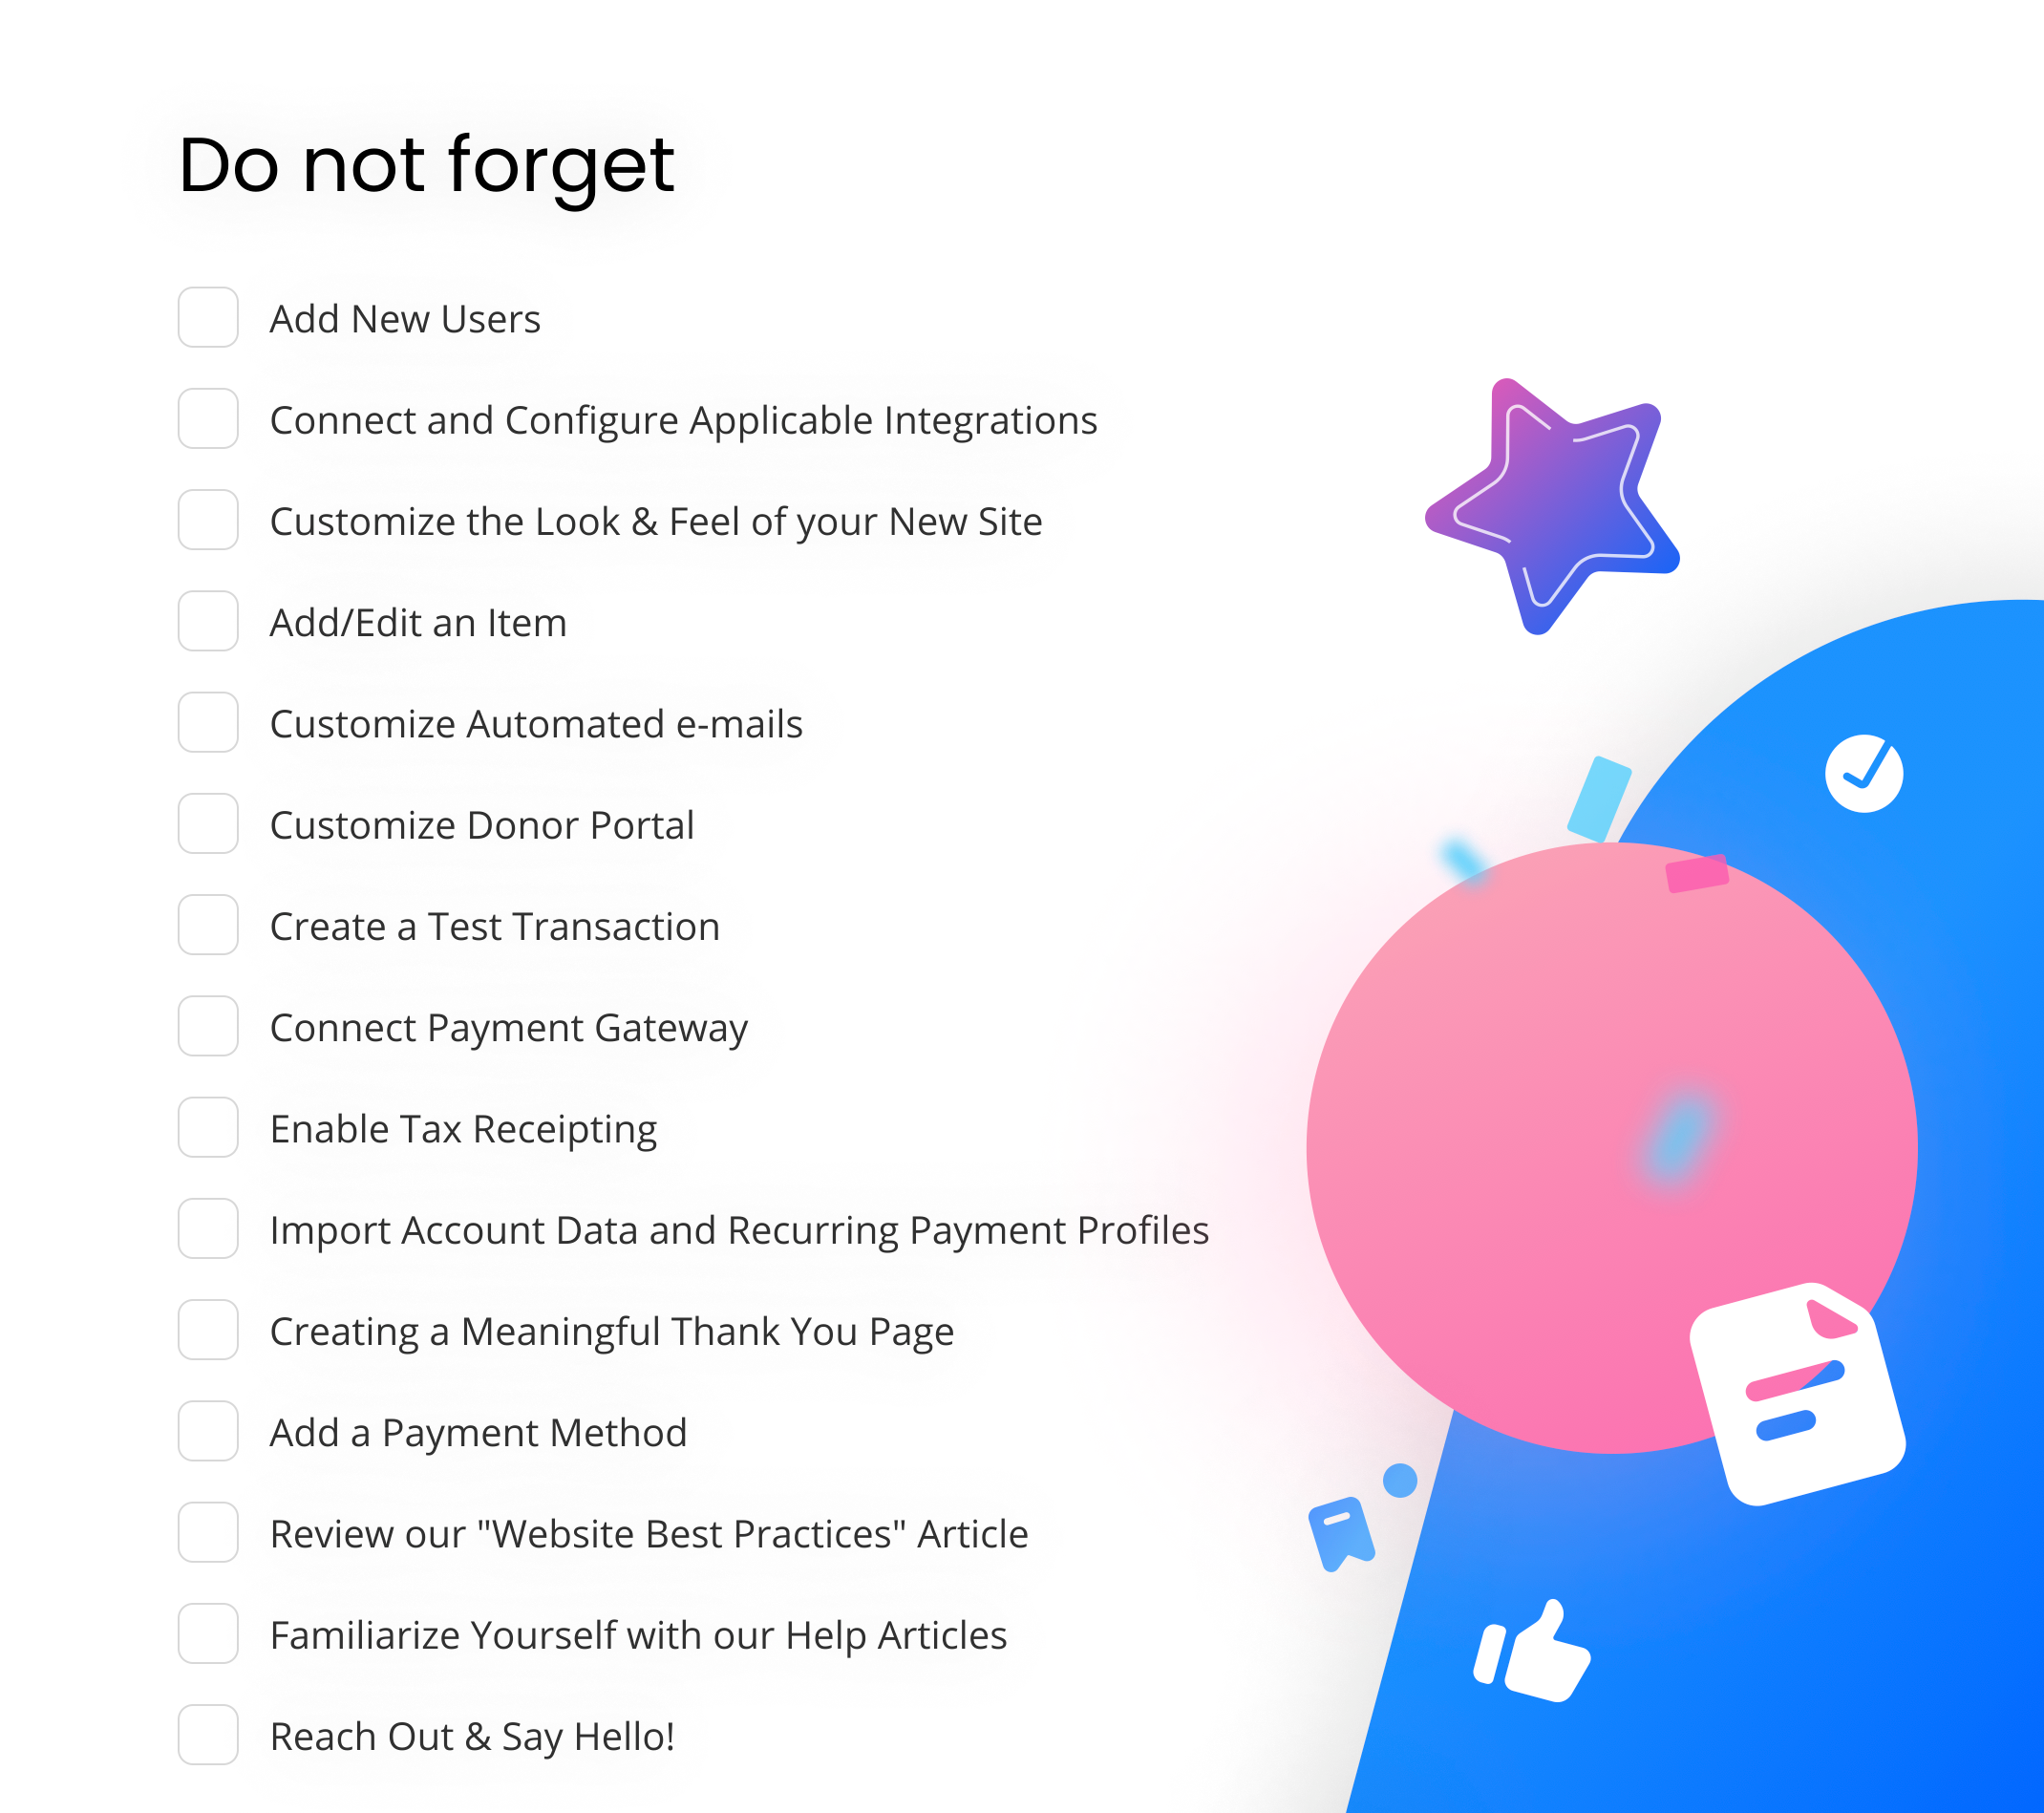 Go Live Checklist — Onboarding